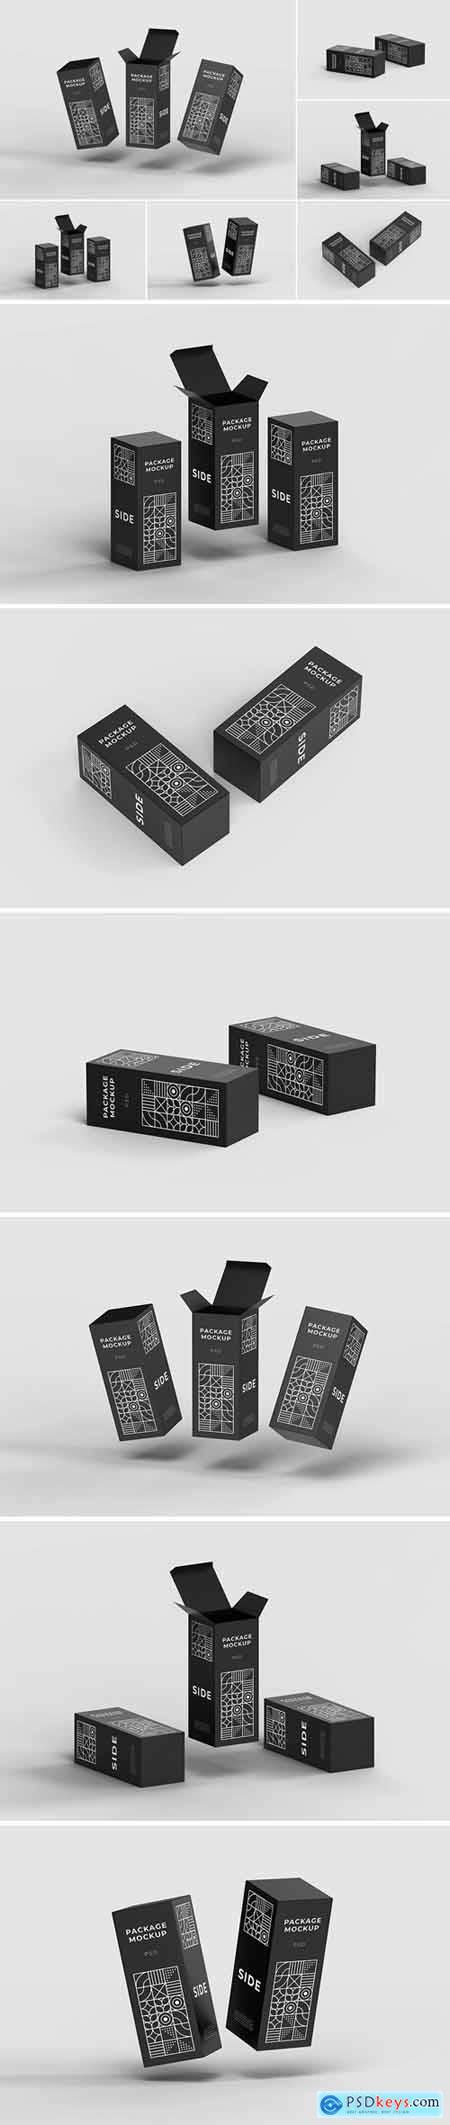 Product Mock Ups Page 17 Free Download Photoshop Vector Stock Image